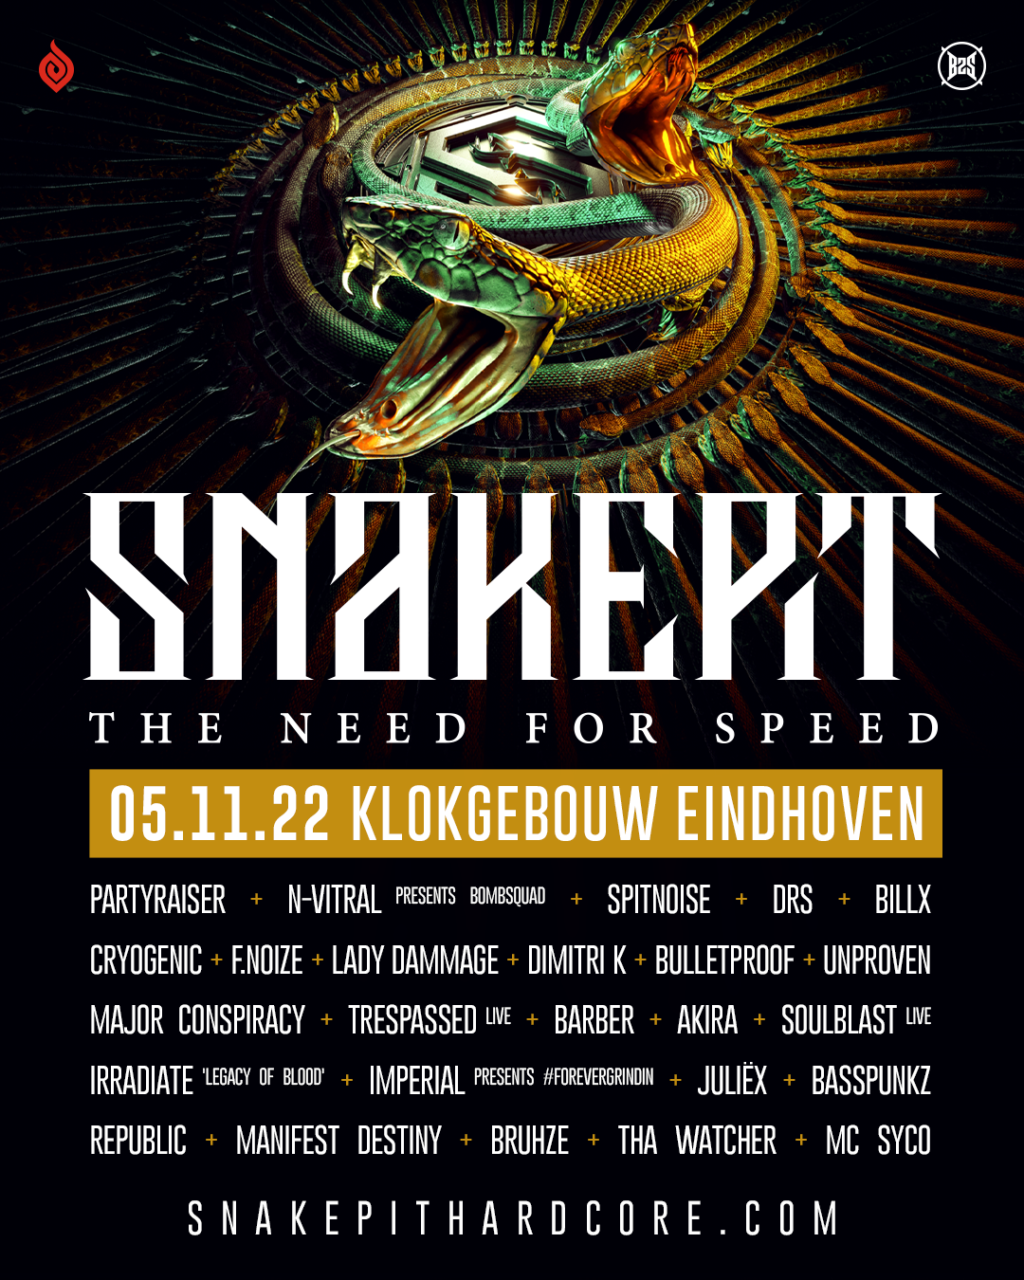 Check the full lineup for Snakepit 2022 now! Masters of Hardcore